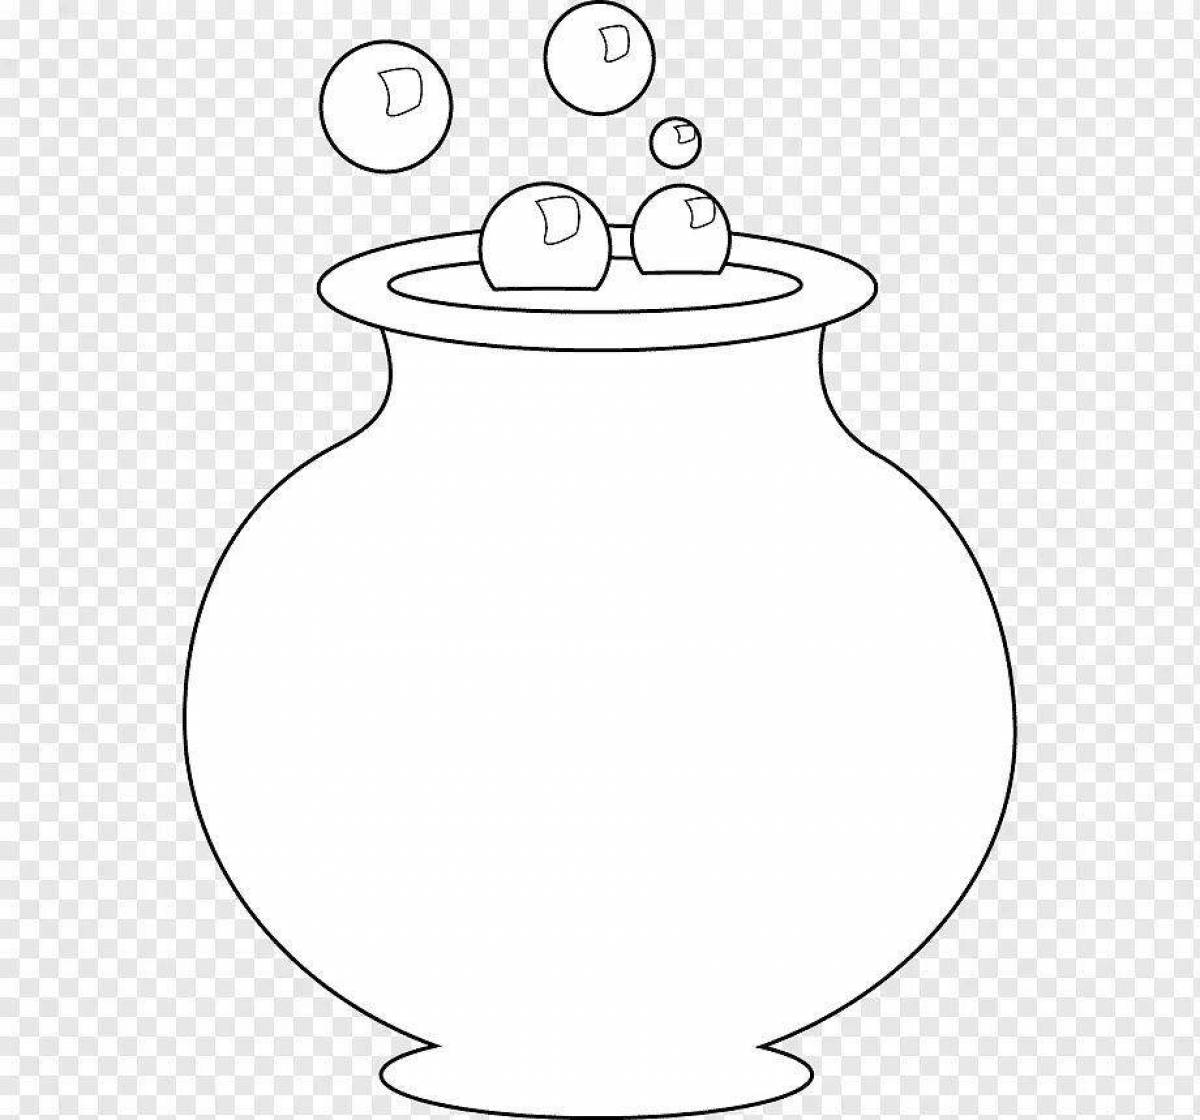 Funny cauldron coloring page